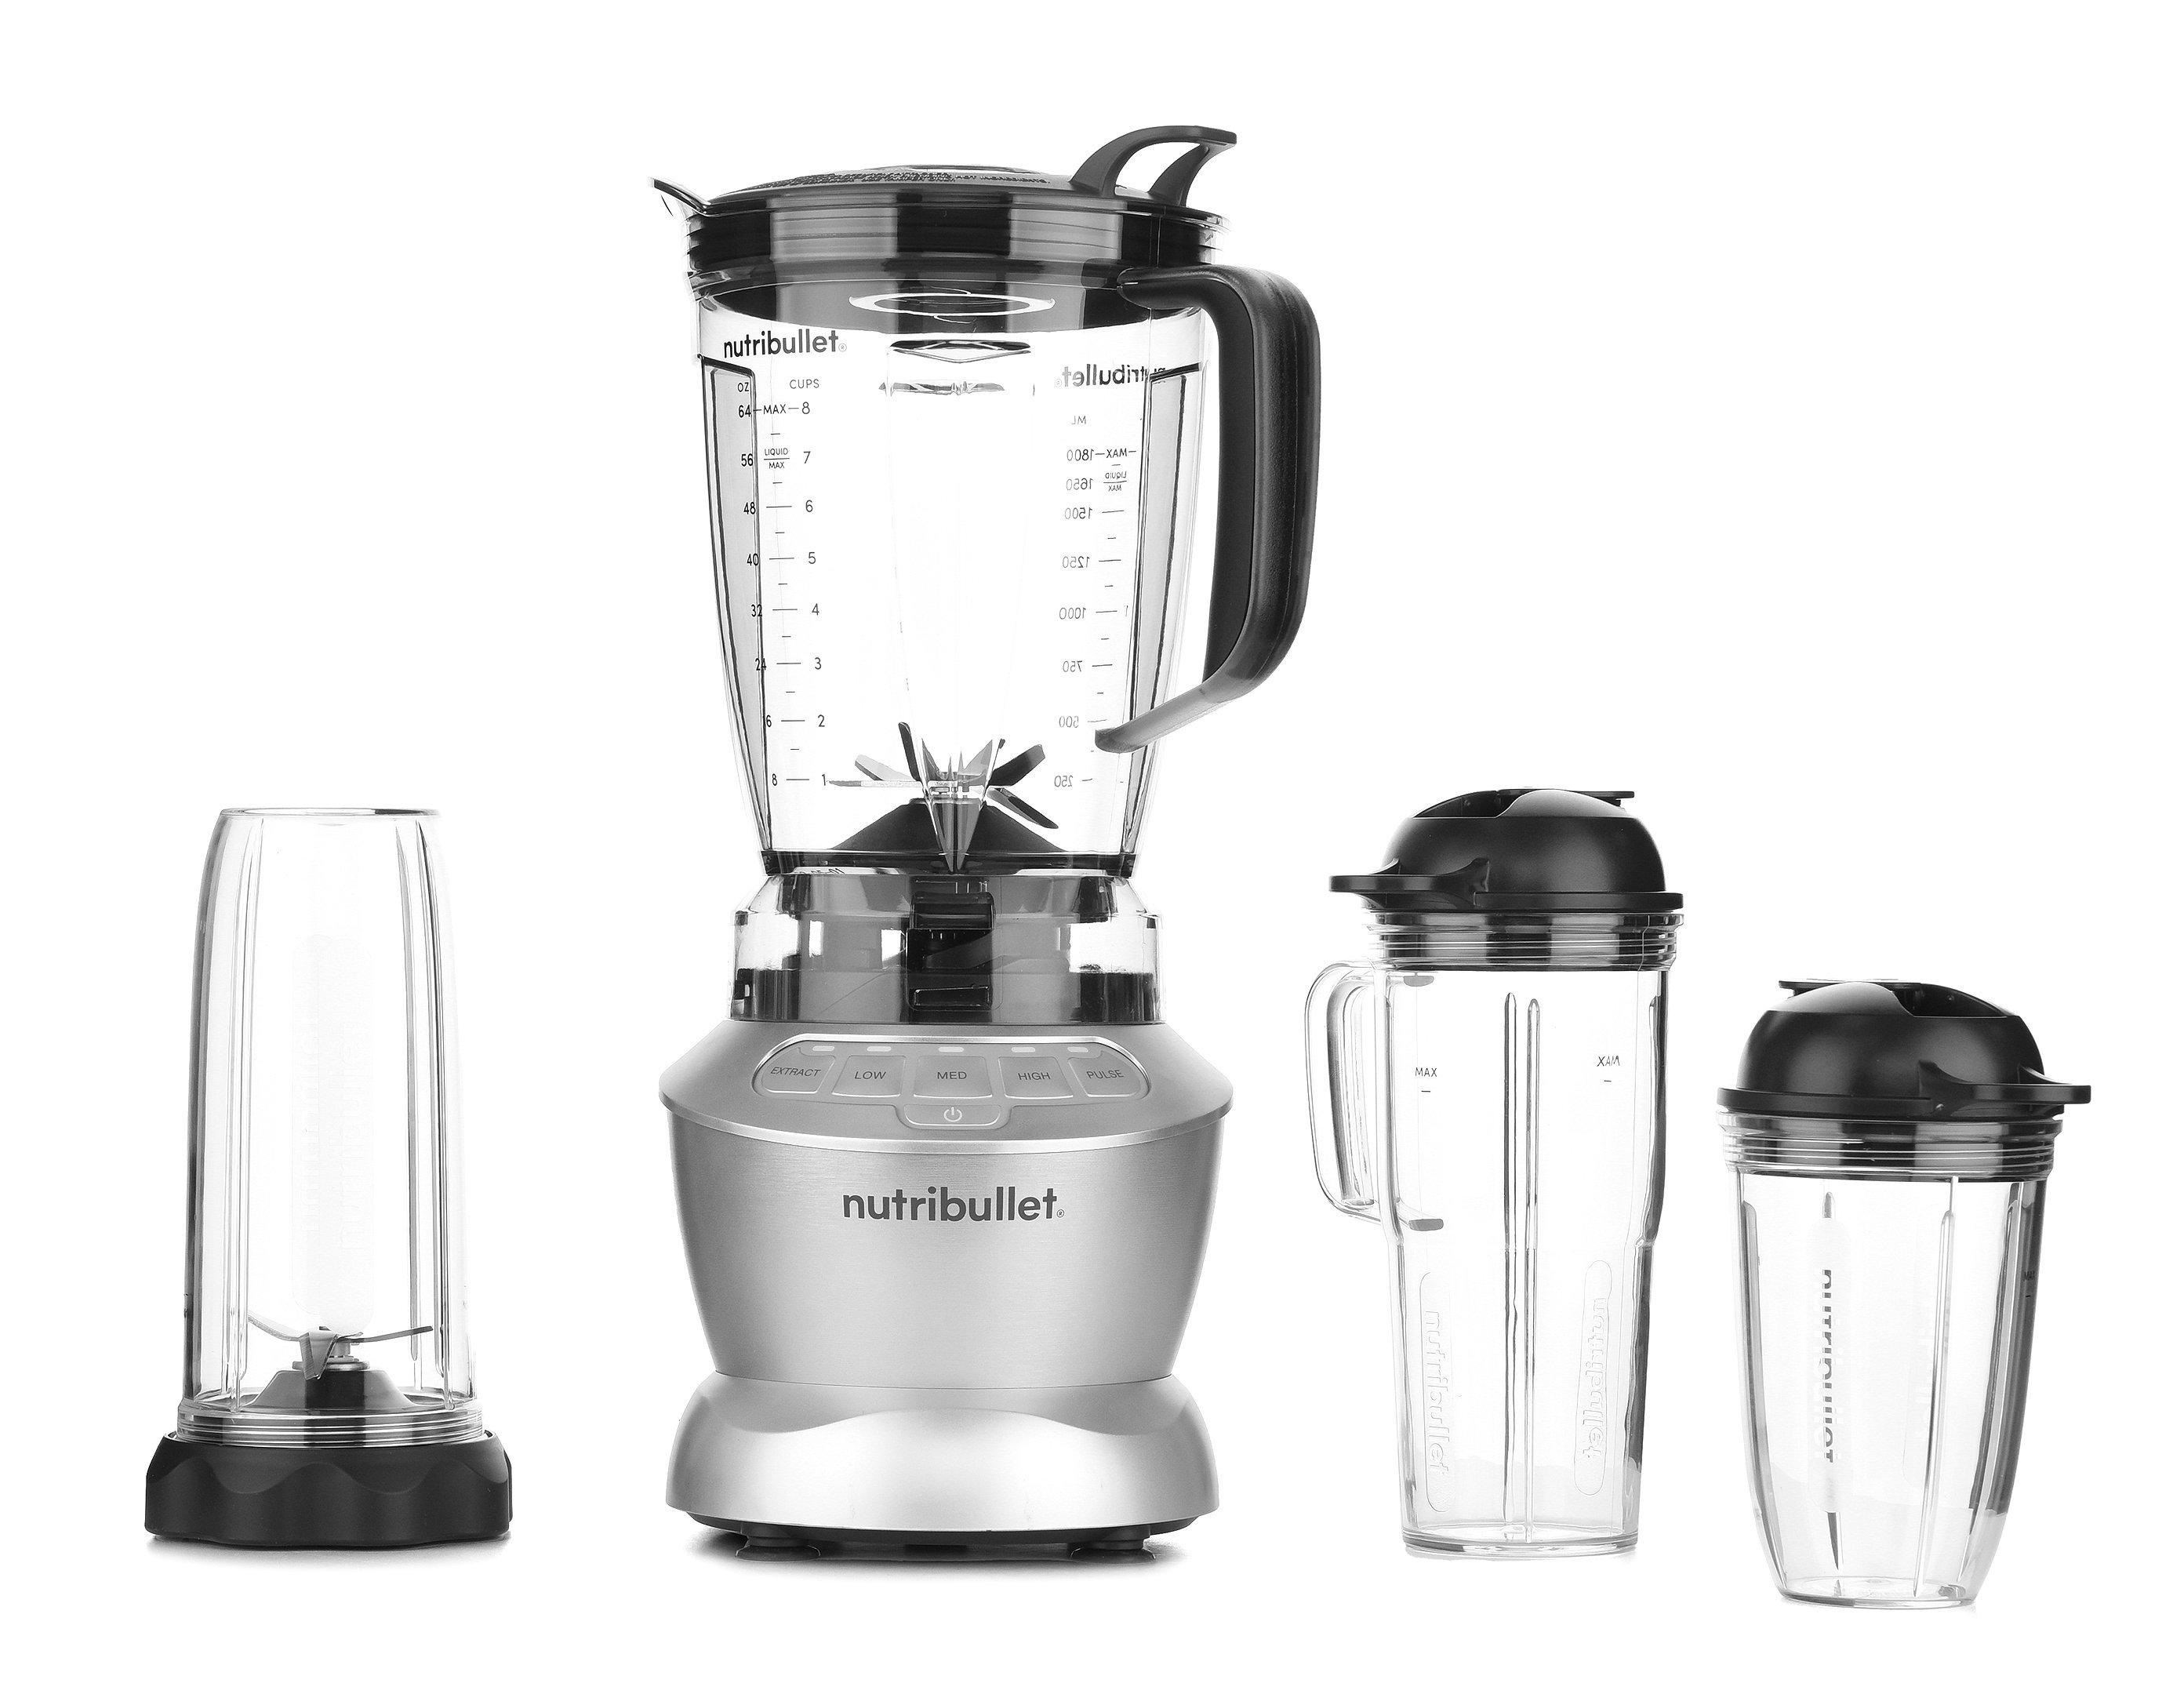 Nutribullet Blender Combo with 3 Precision Speed Controls and Pulse  function, 1200 Watts, 1.8 Litres, Easy Twist Extractor Blades, BPA-Free  (Silver)